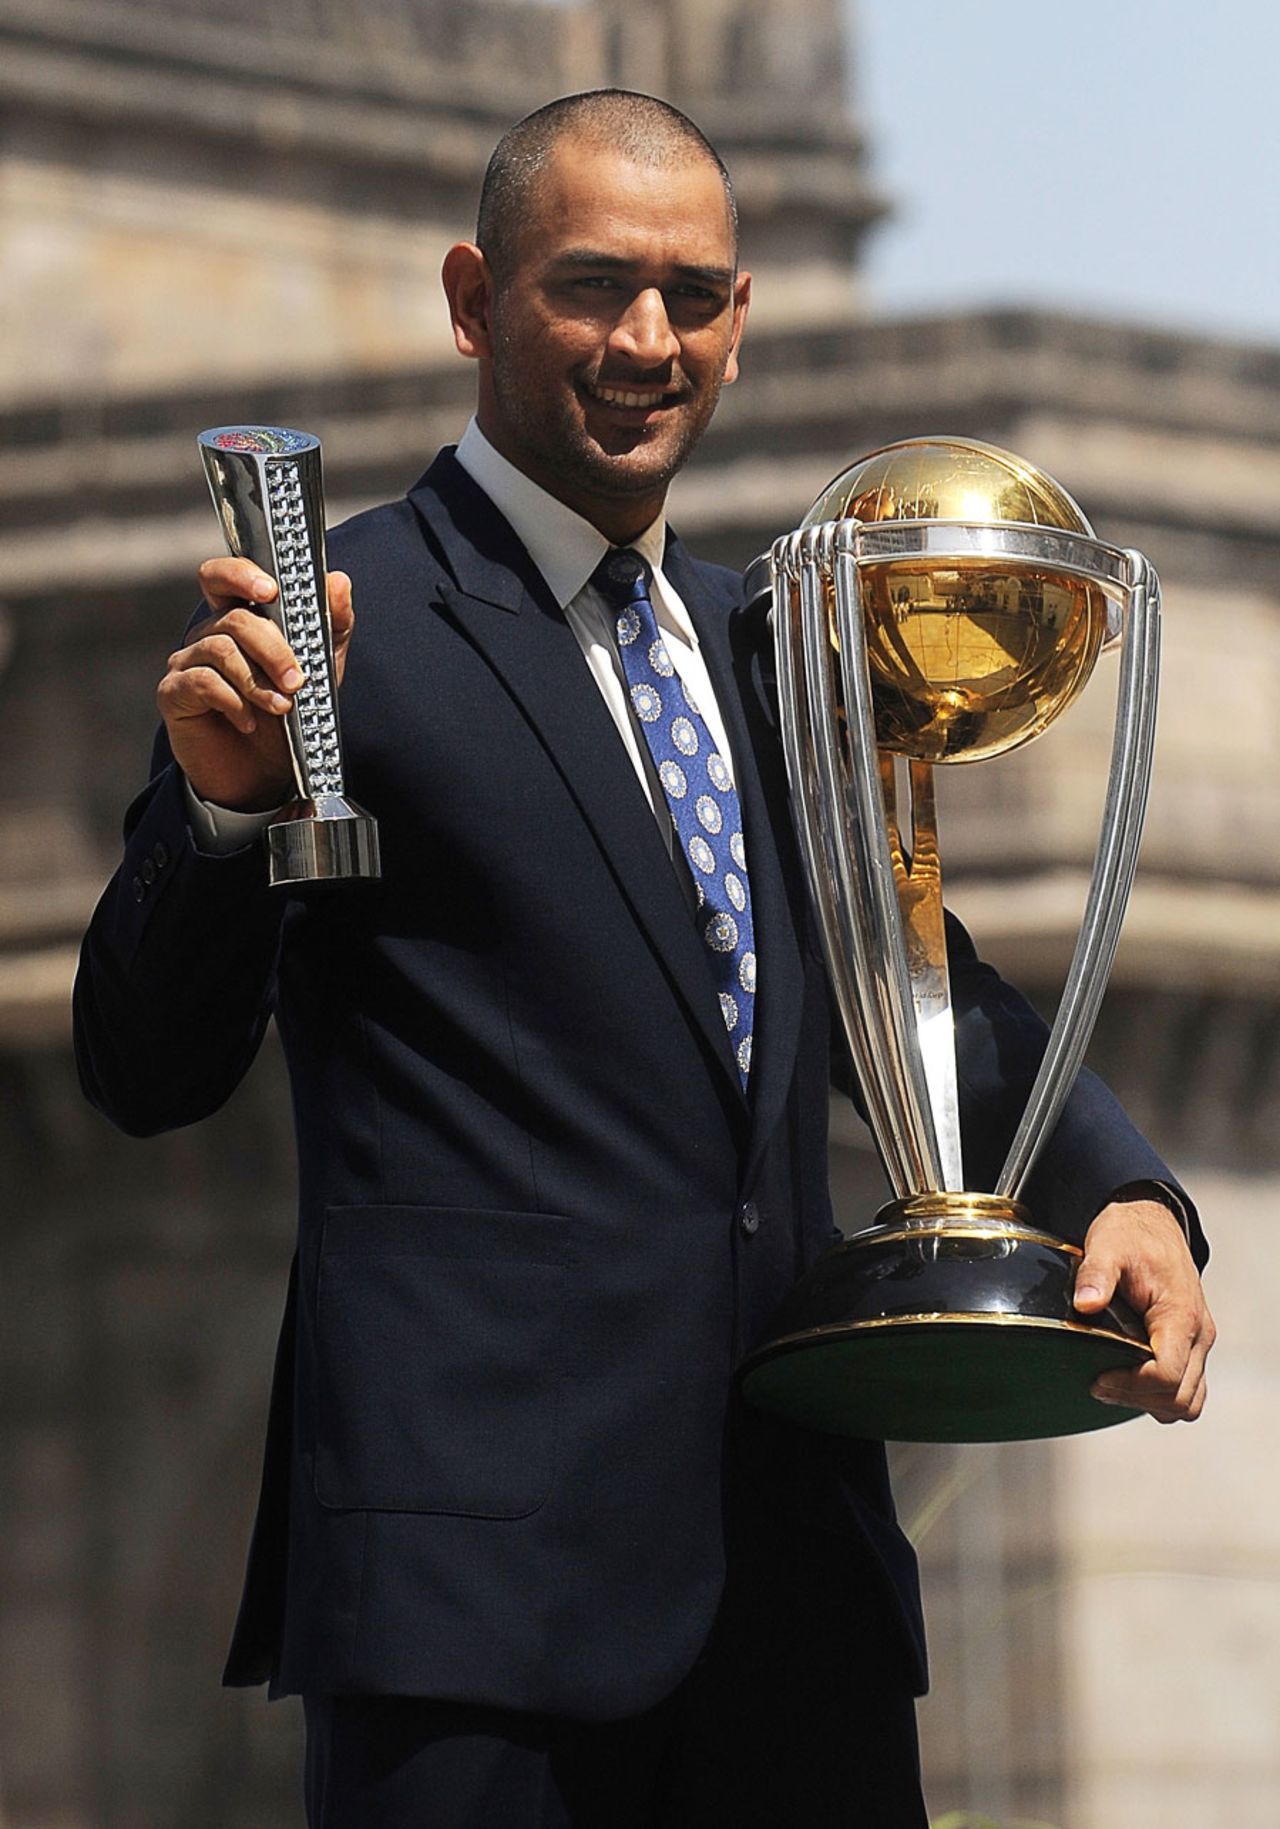 MS Dhoni with the World Cup trophy and his Man of the Match award from the final, Mumbai, April 3, 2011